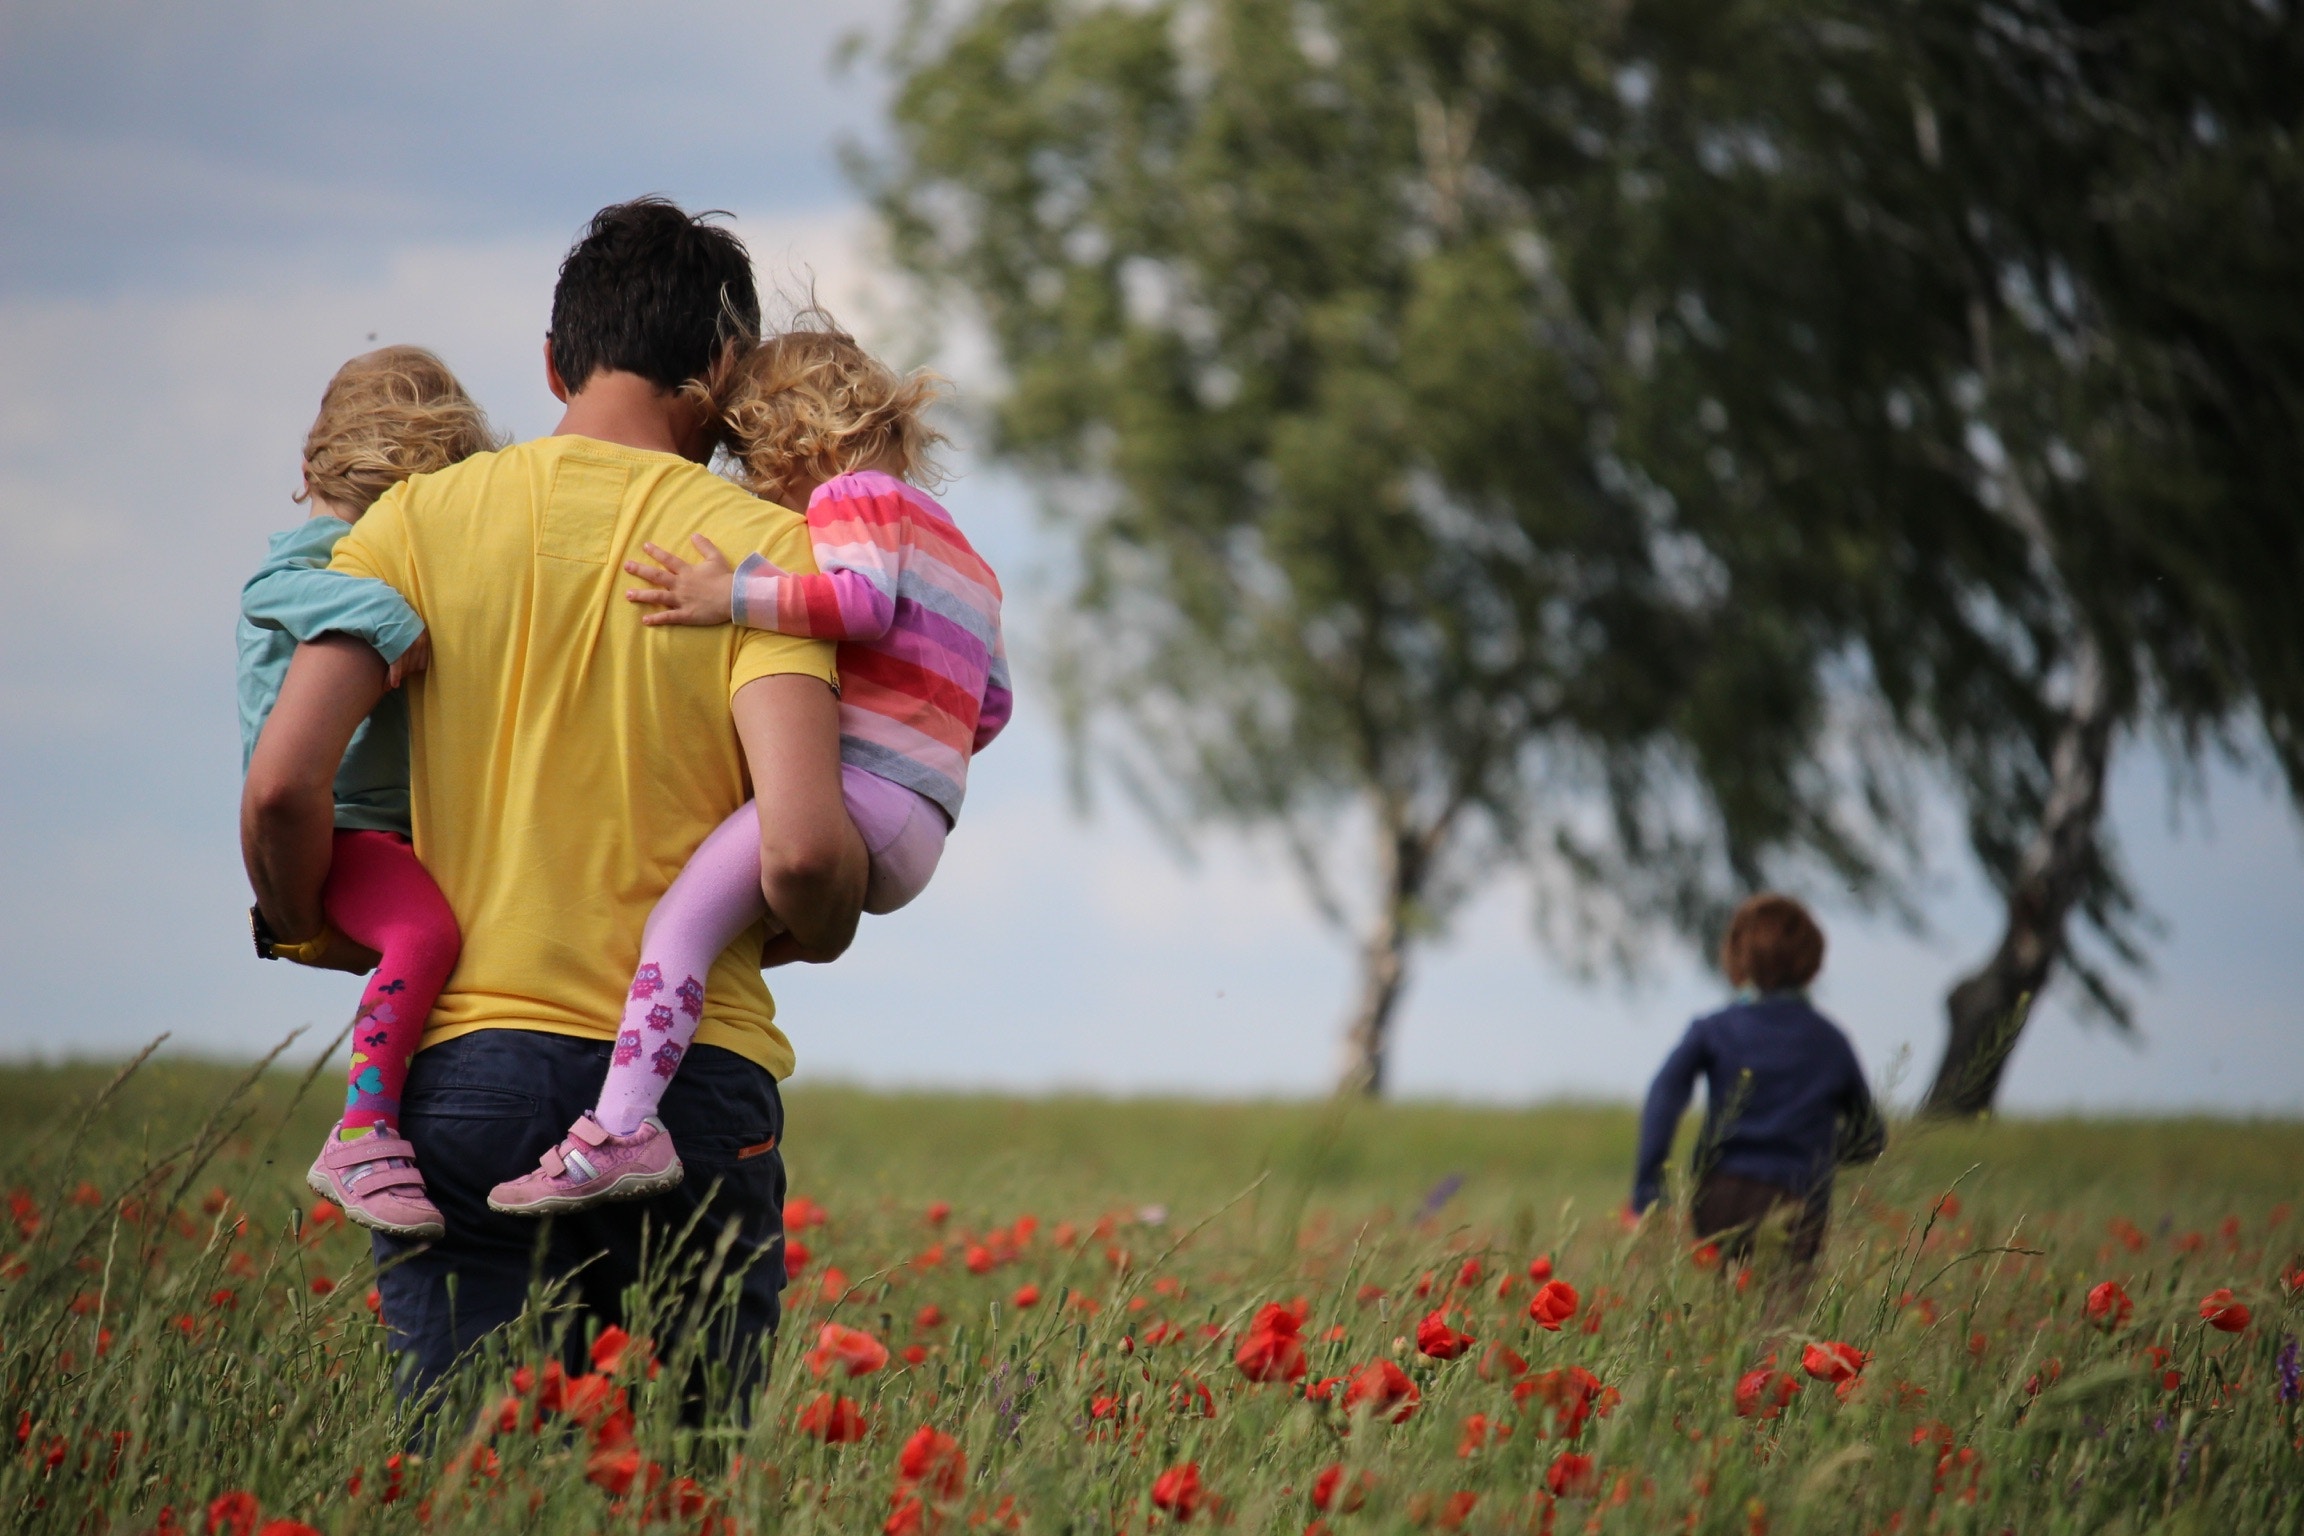 A view from behind of a man who is carrying two small children, one on each arm. They're walking through a field of flowers towards some trees. An older child runs ahead of them.